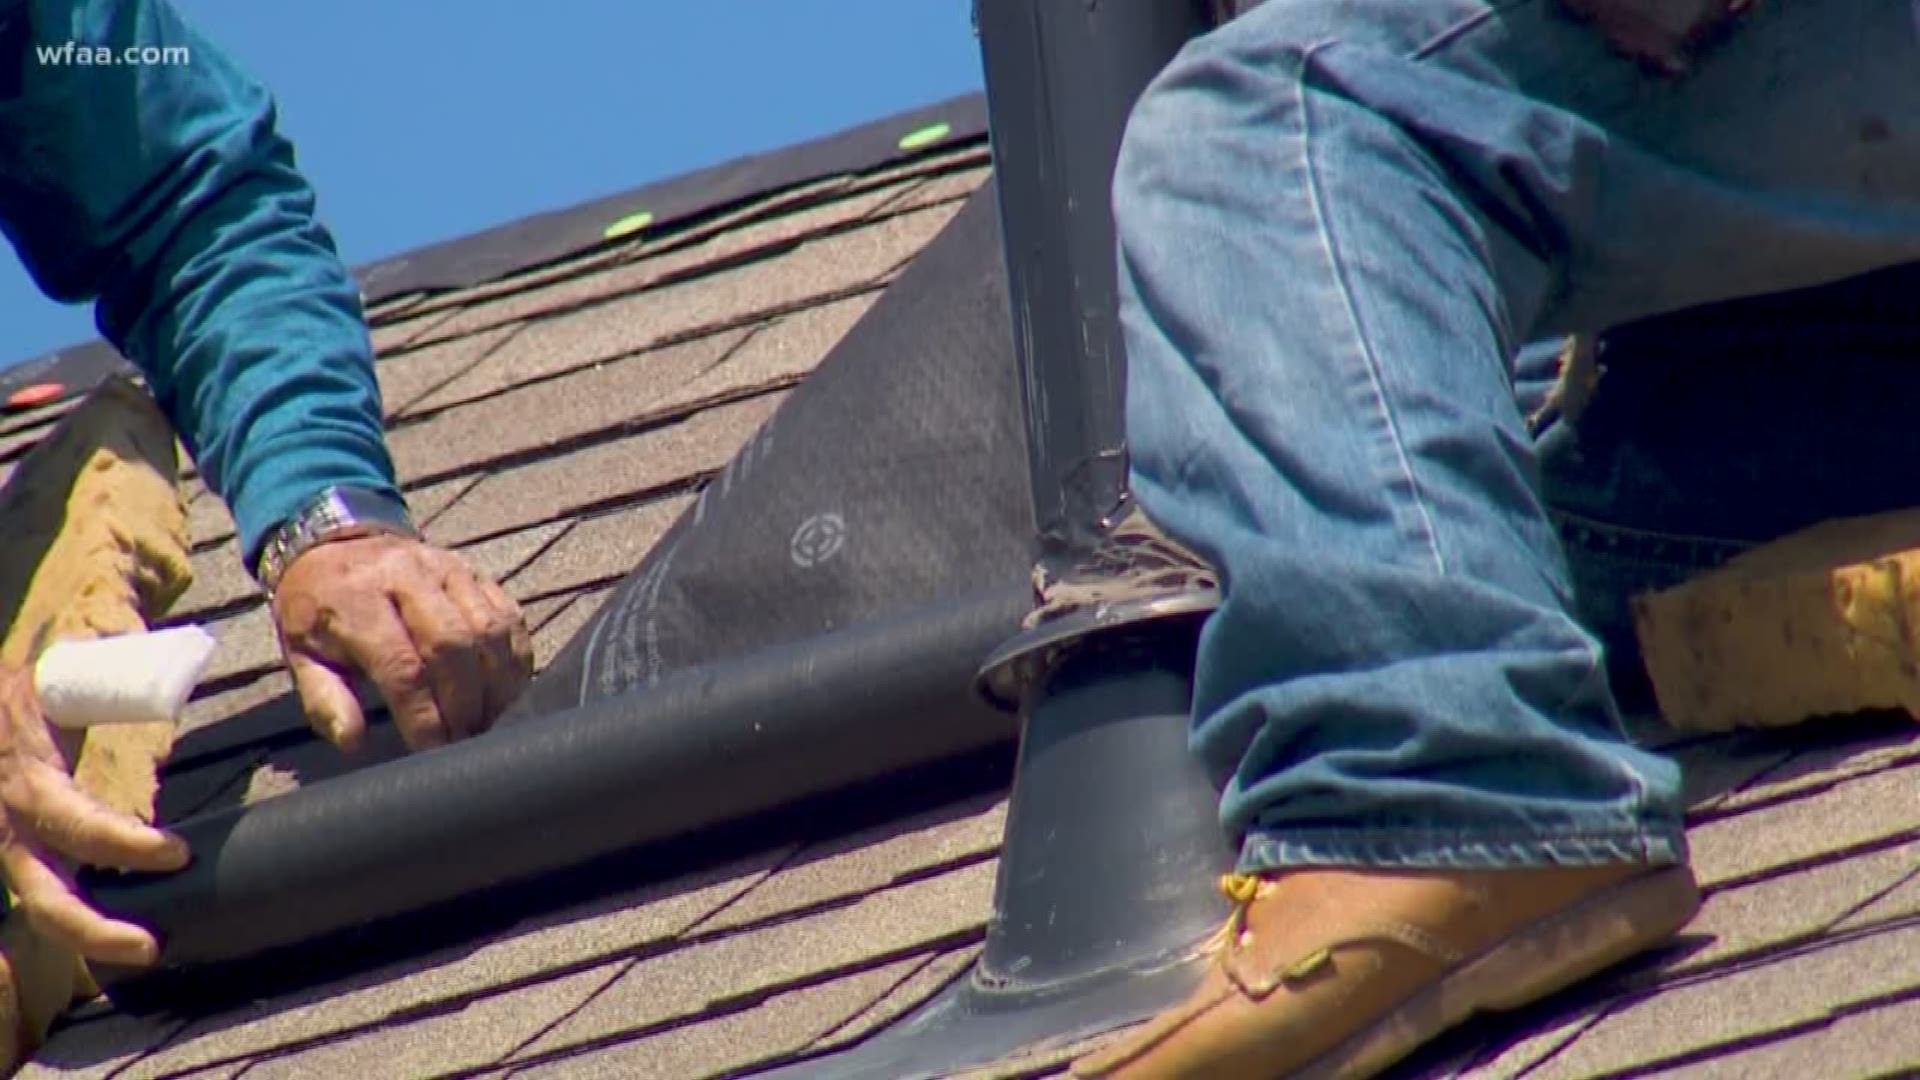 Hail is stressful enough. Roofers who are out for your money is even worse.